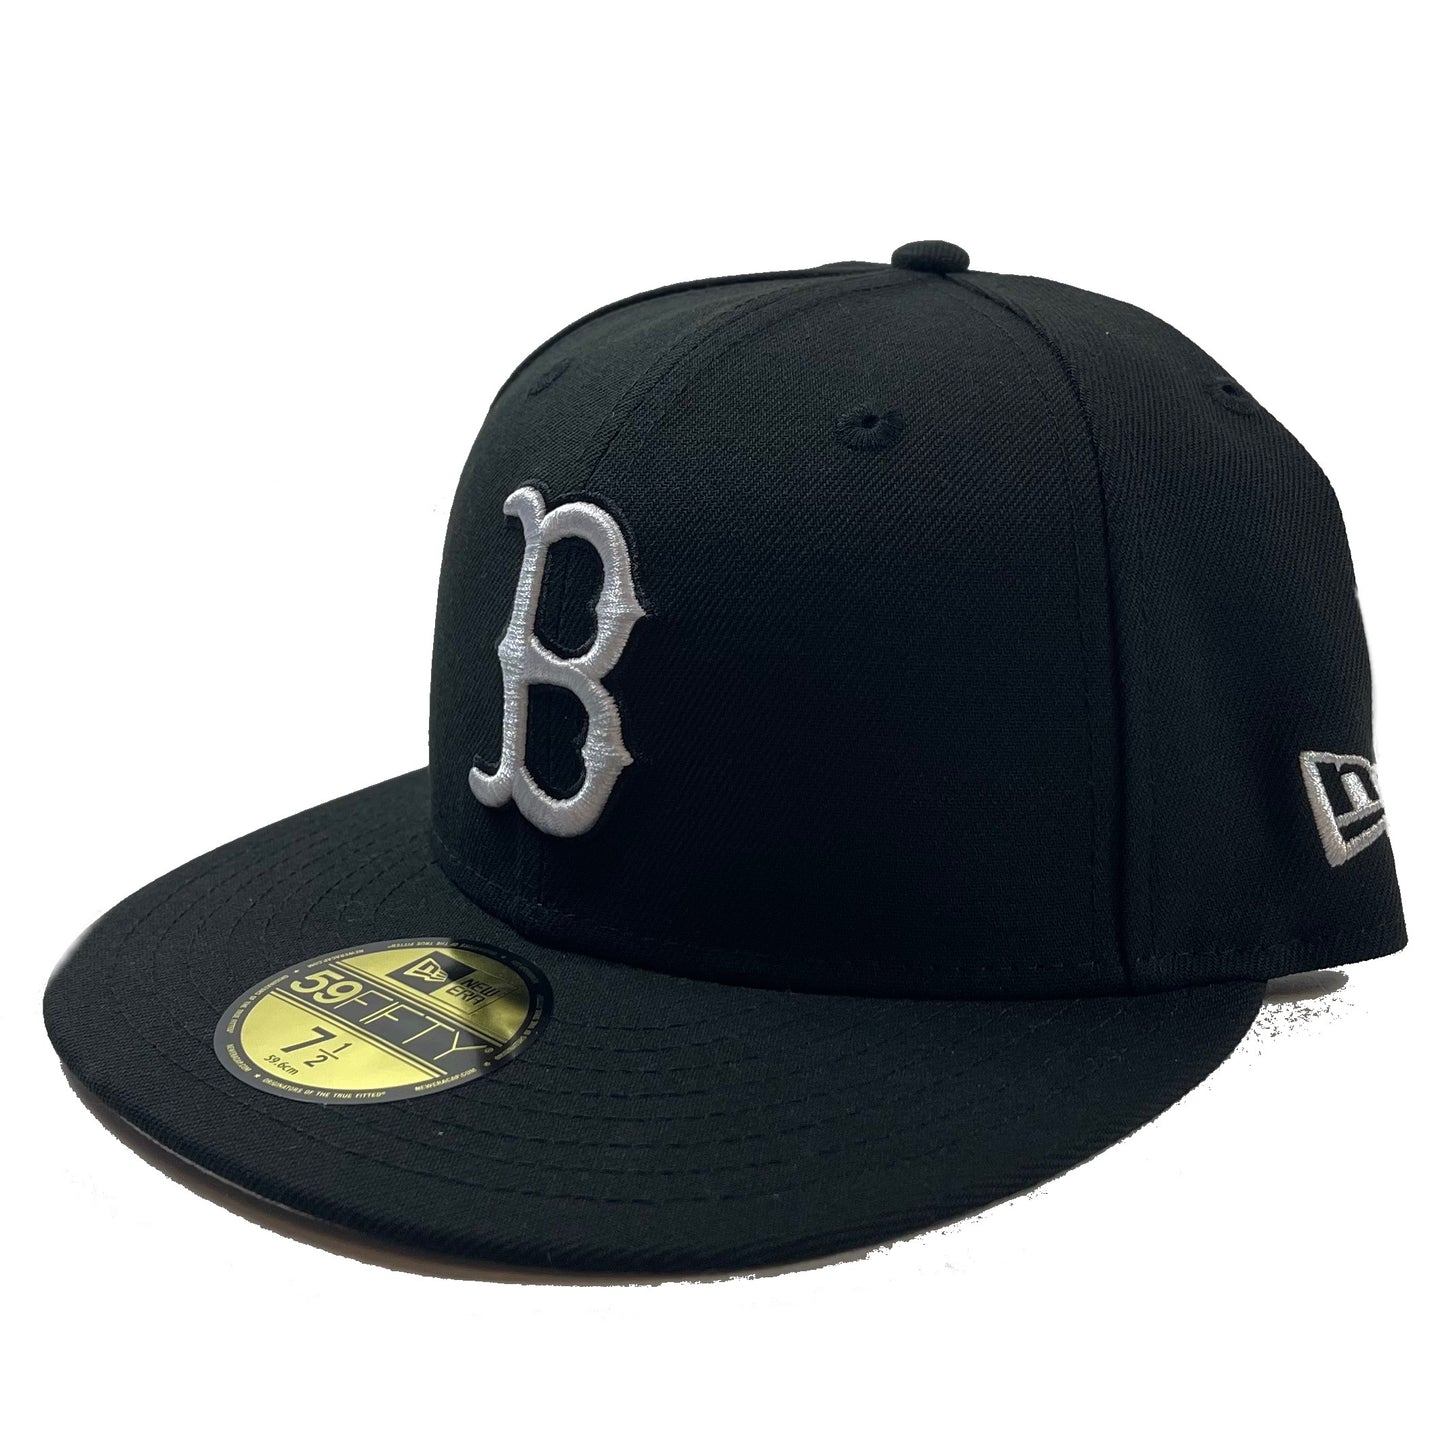 Boston Red Sox (Black) Fitted